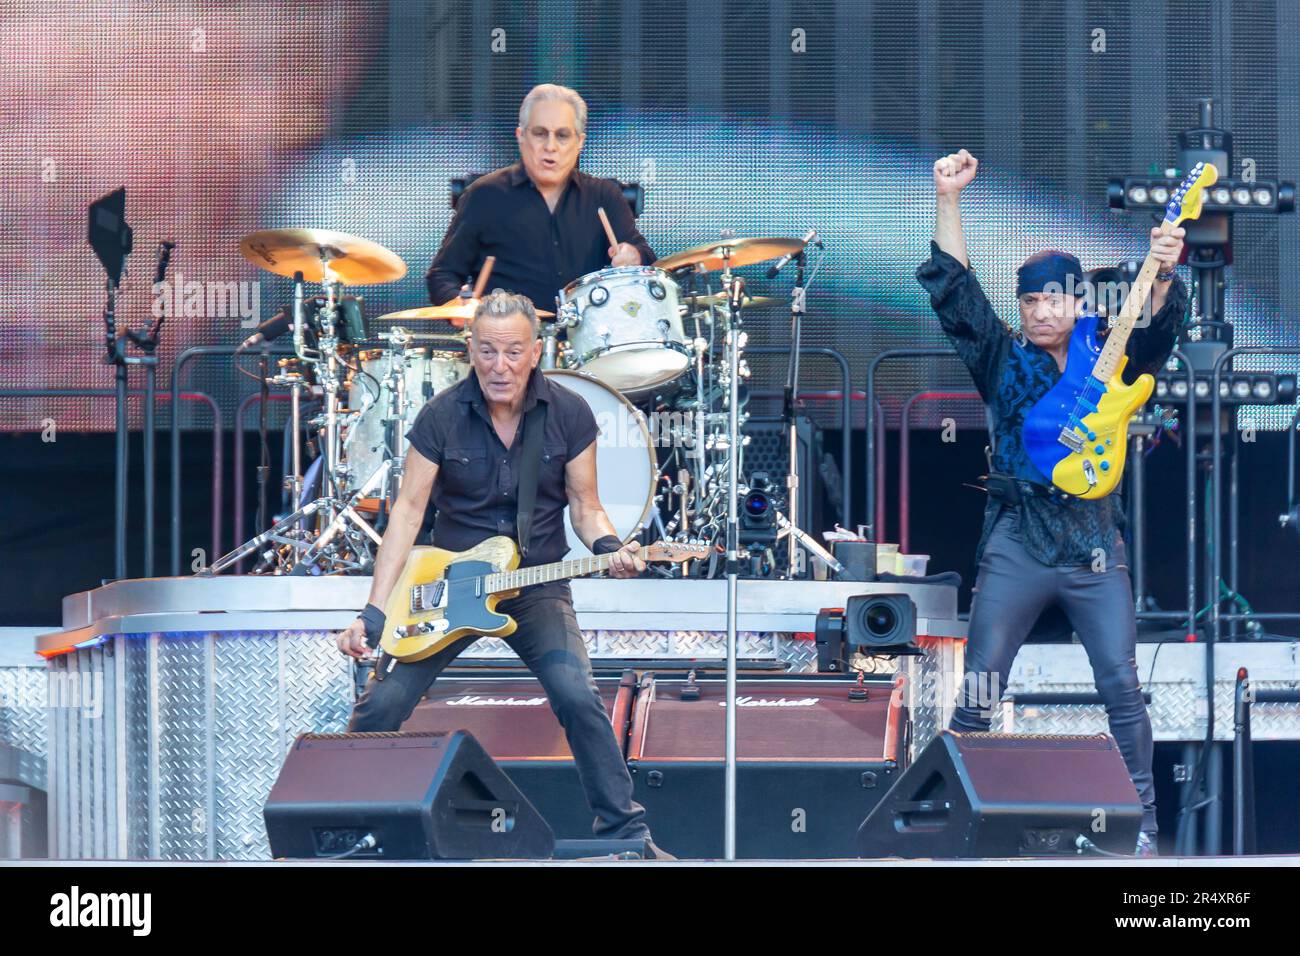 Edinburgh, Scotland. 30th May 2023. Bruce Springsteen and the E Street Band play Murrayfield Stadium on the first UK show of his current World Tour. Bruce and Steven van Zandt showing unrivalled energy in front of 65,000 ecstatic fans. Credit: Tim J. Gray/Alamy Live News Stock Photo